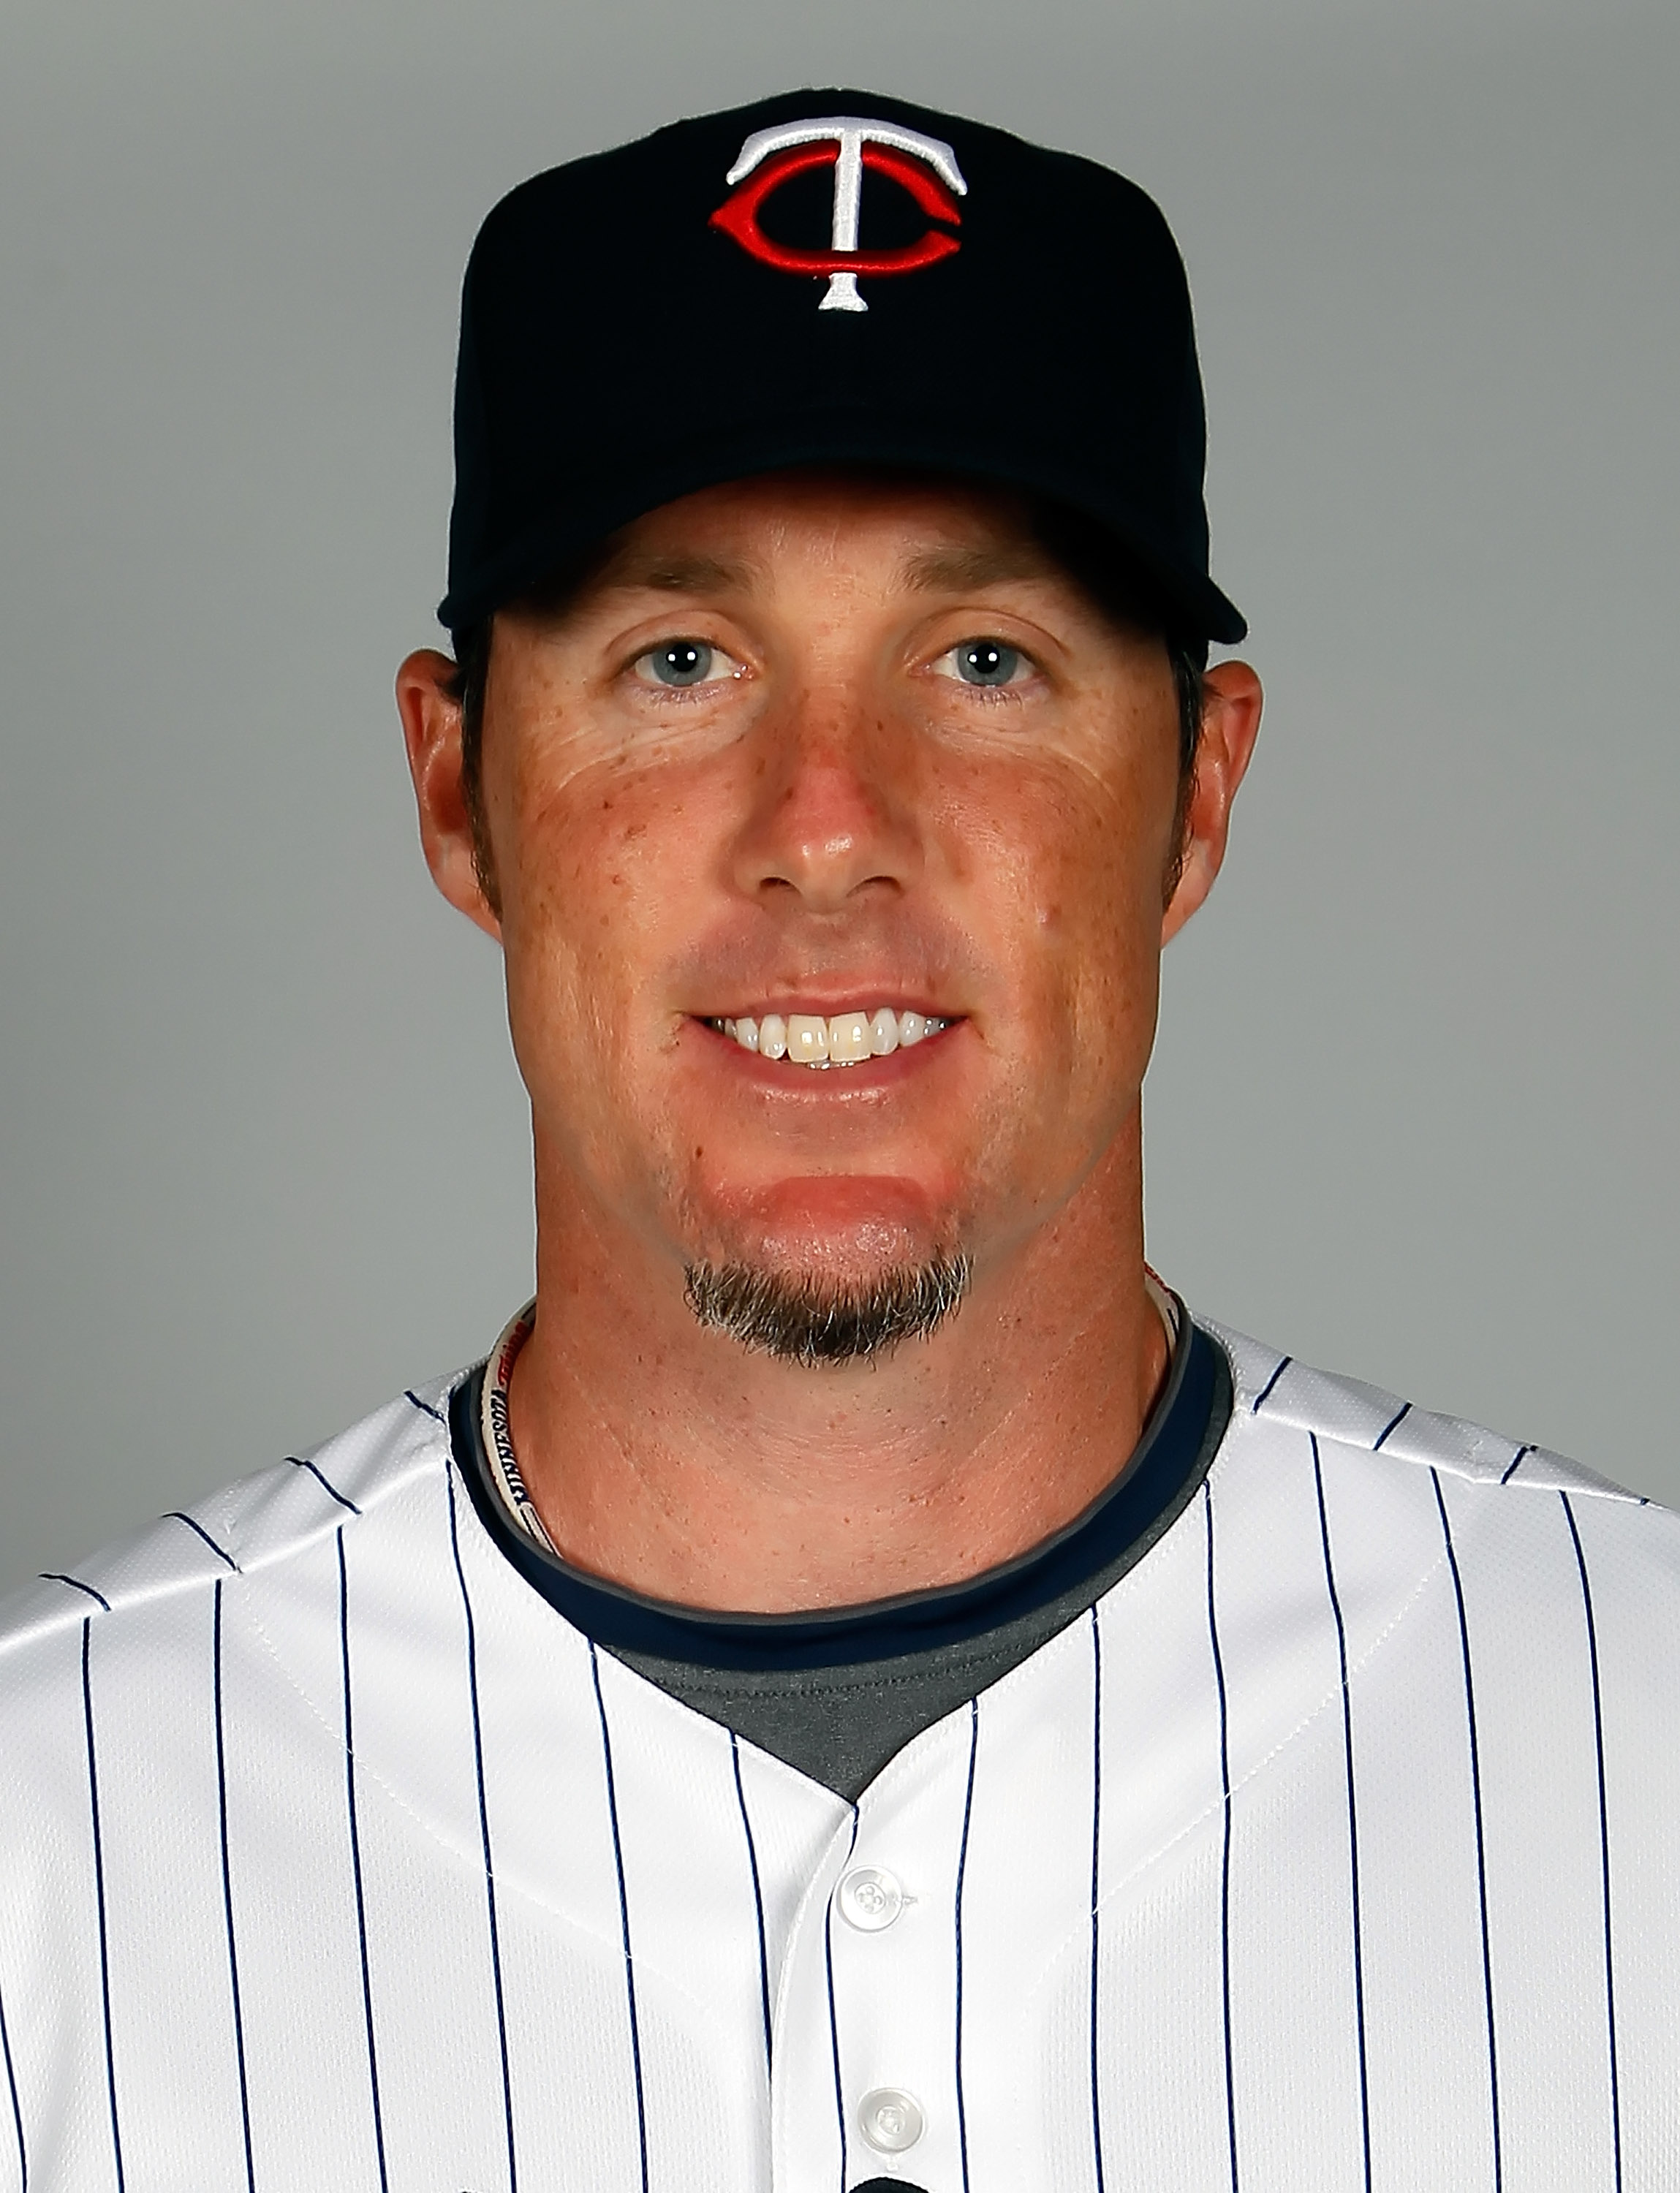 FORT MYERS, FL - FEBRUARY 25:  Pitcher Joe Nathan #36 of the Minnesota Twins poses for a photo during photo day at Hammond Stadium on February 25, 2011 in Fort Myers, Florida.  (Photo by J. Meric/Getty Images)